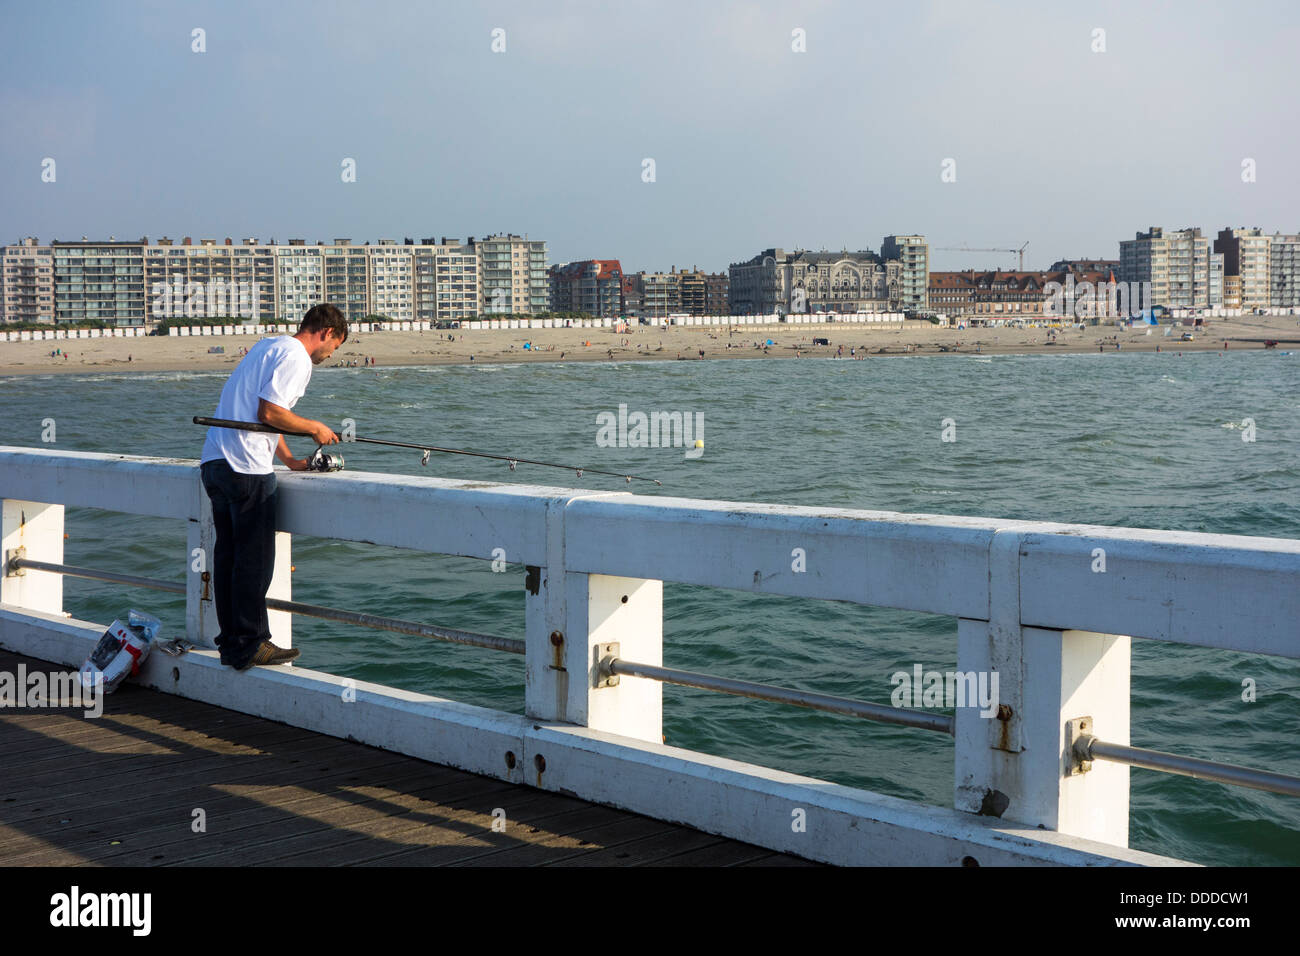 Angler fishing with fishing rod from pier along the North Sea coast at Nieuwpoort / Nieuport, Belgium Stock Photo